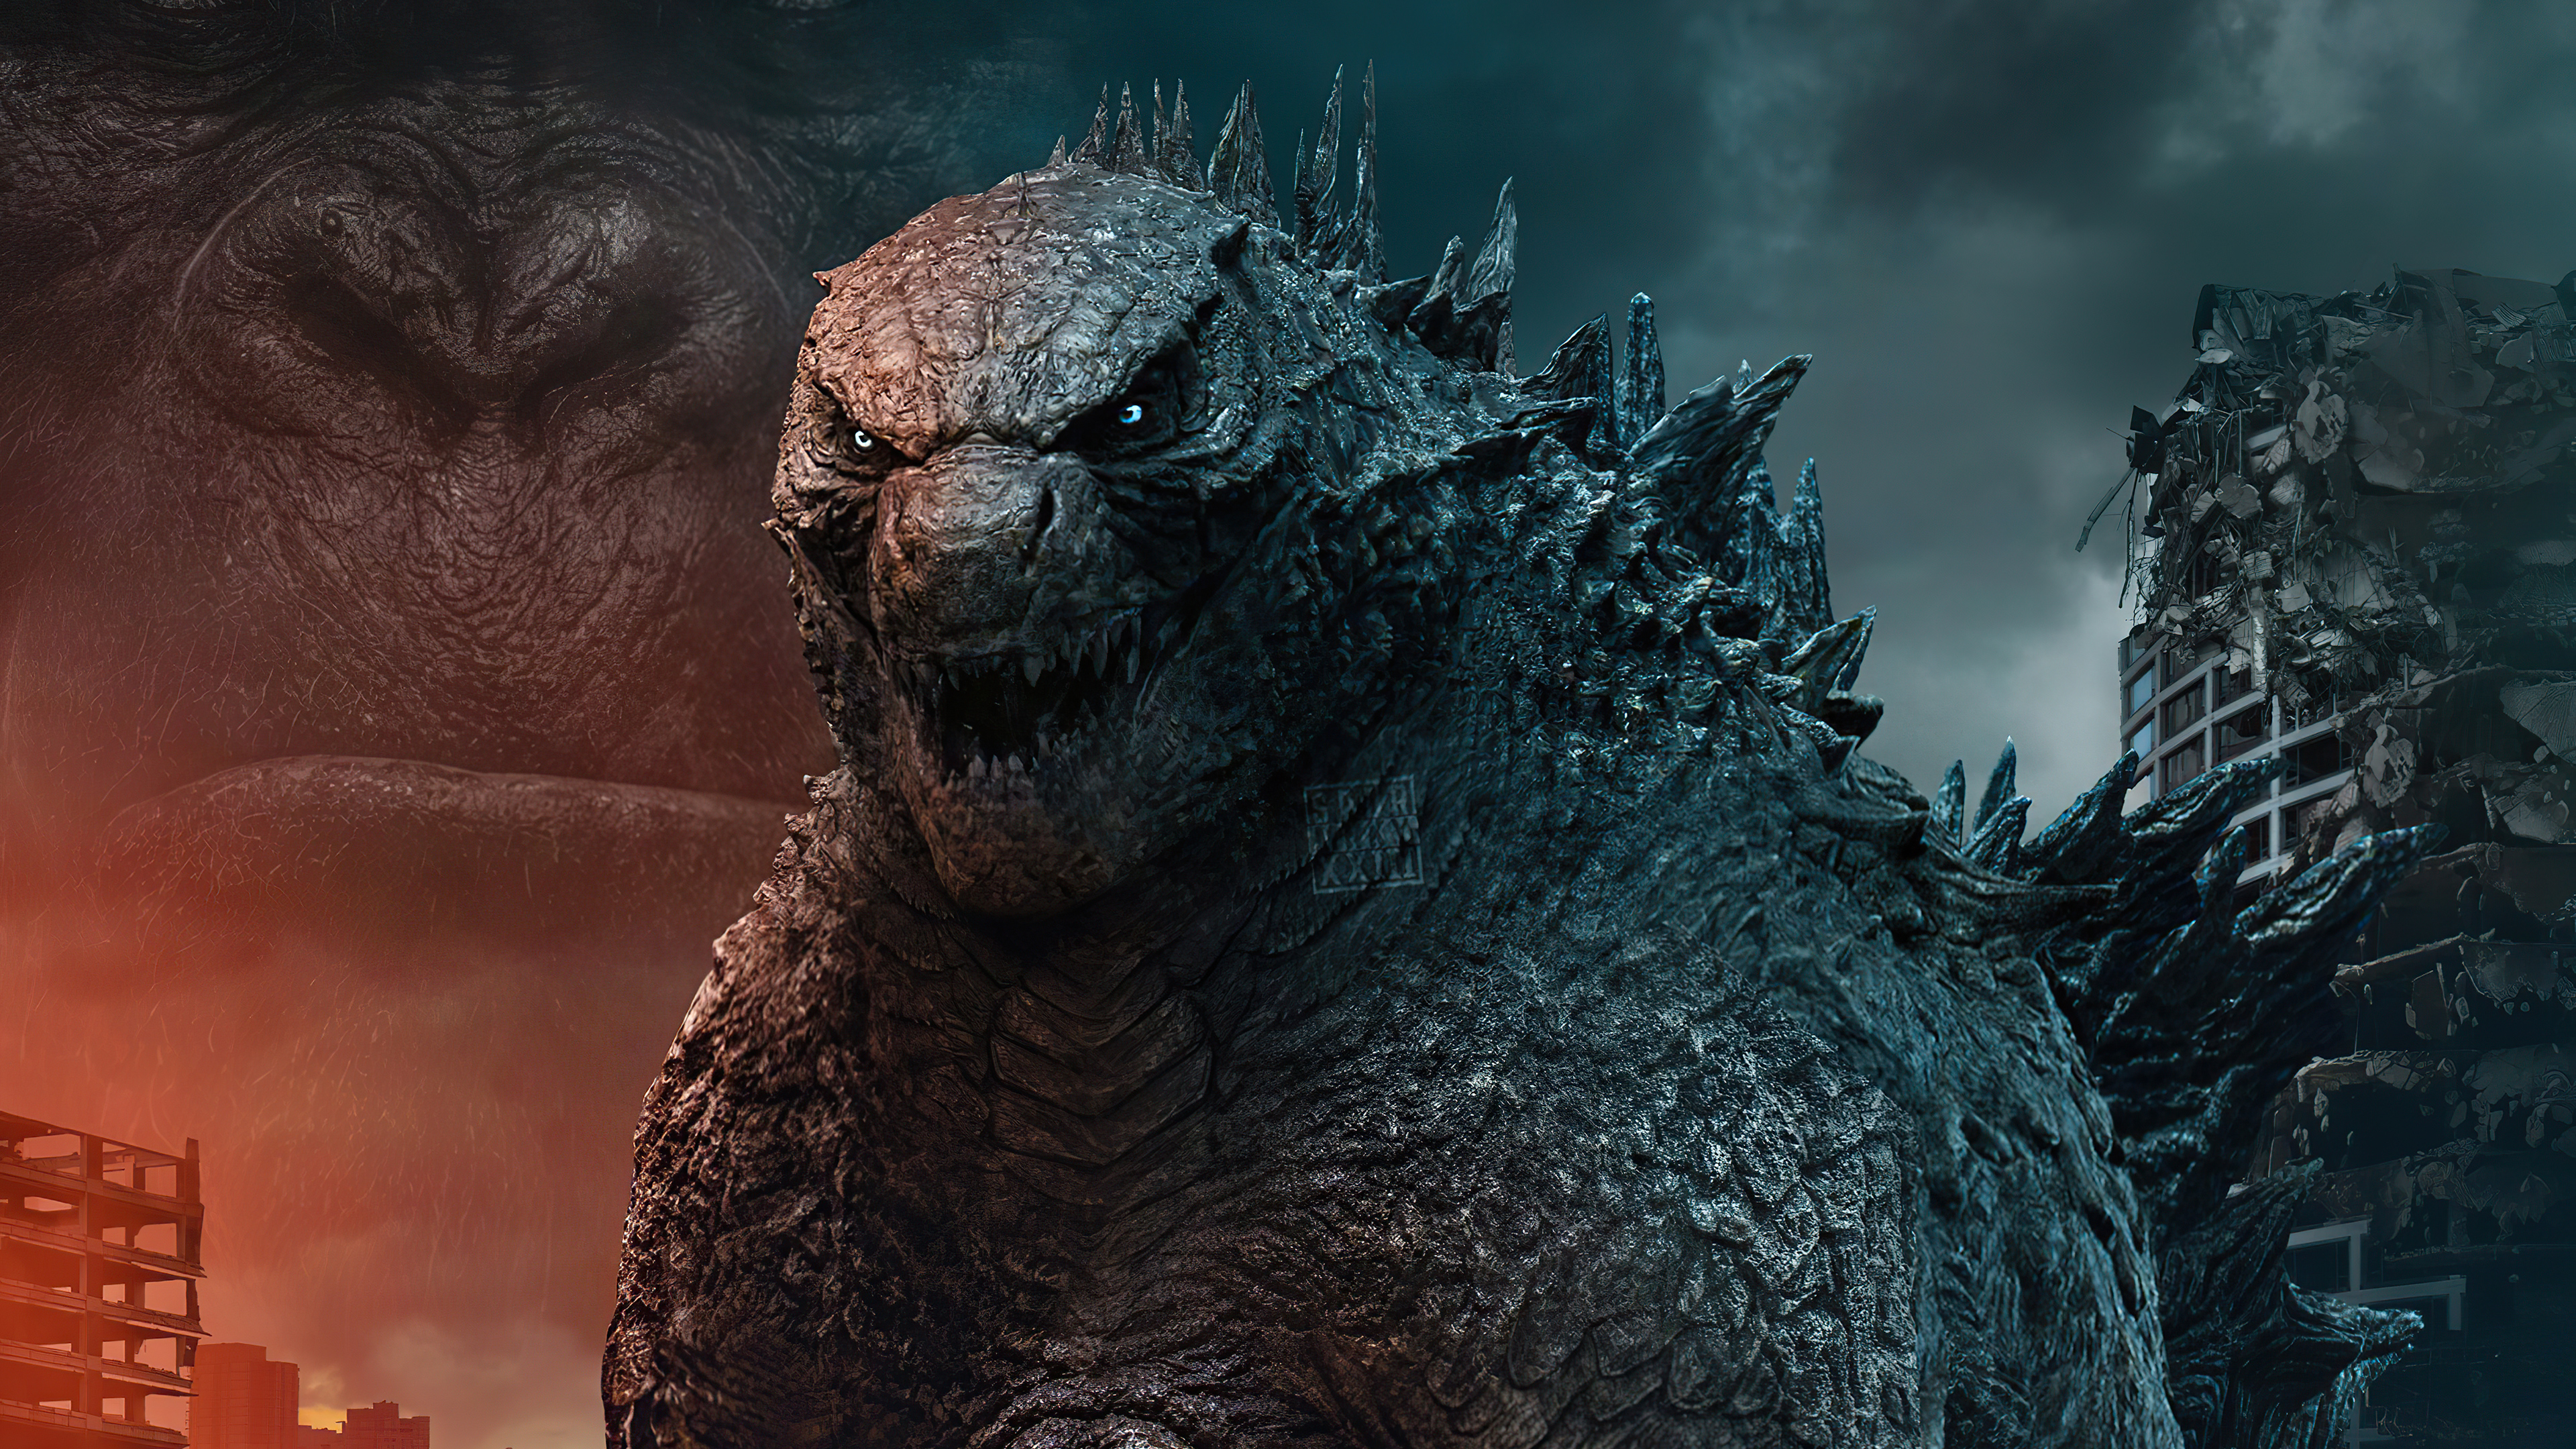 Godzilla Vs Kong King Characters Fan Poster Wallpaper Hd Movies 4k Wallpapers Images Photos And Background Wallpapers Den